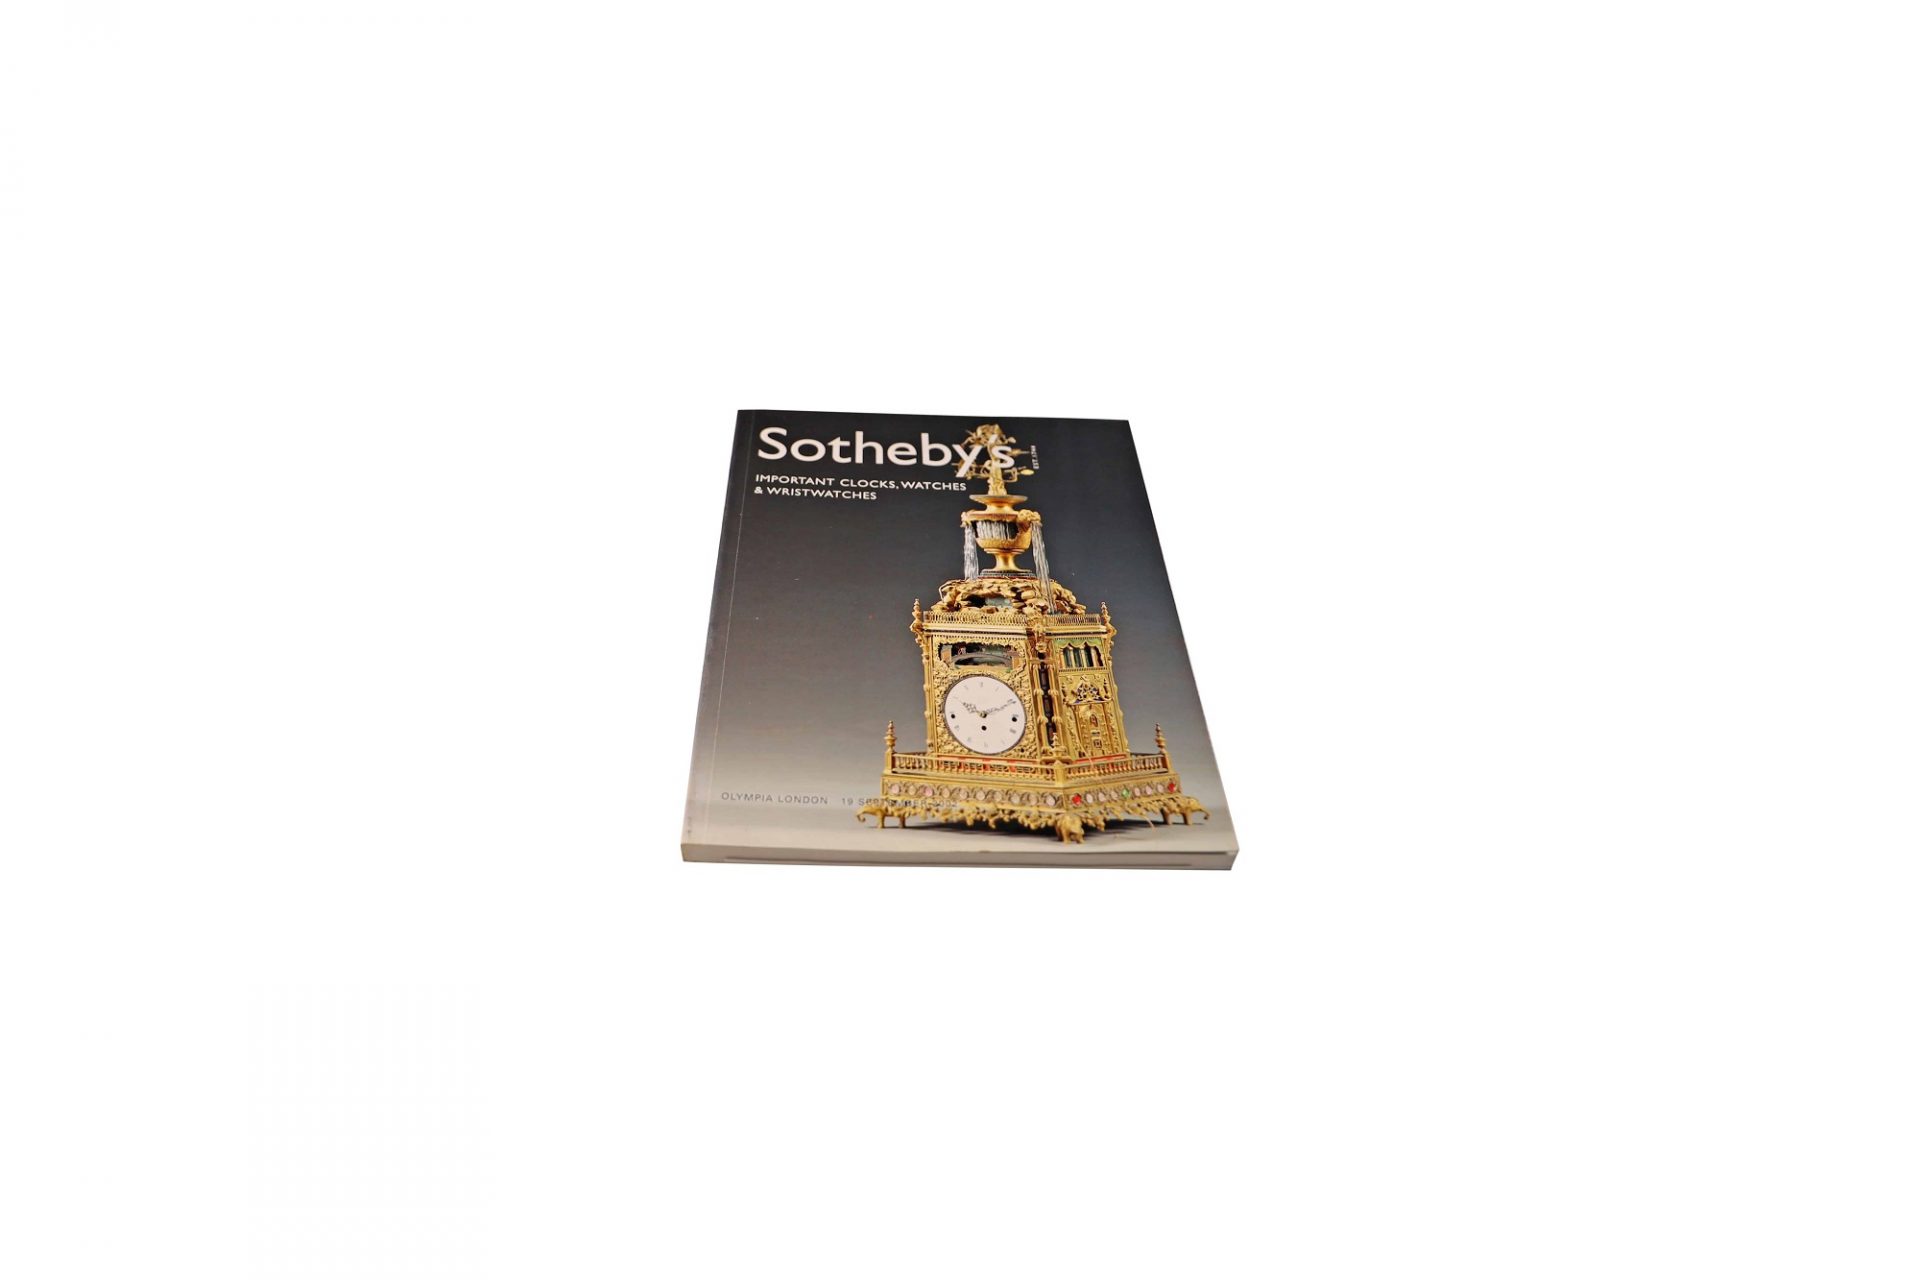 Sotheby's Important Clocks, Watches And wristwatches Landon September 19, 2002 Auction Catalog - Rare Watch Parts